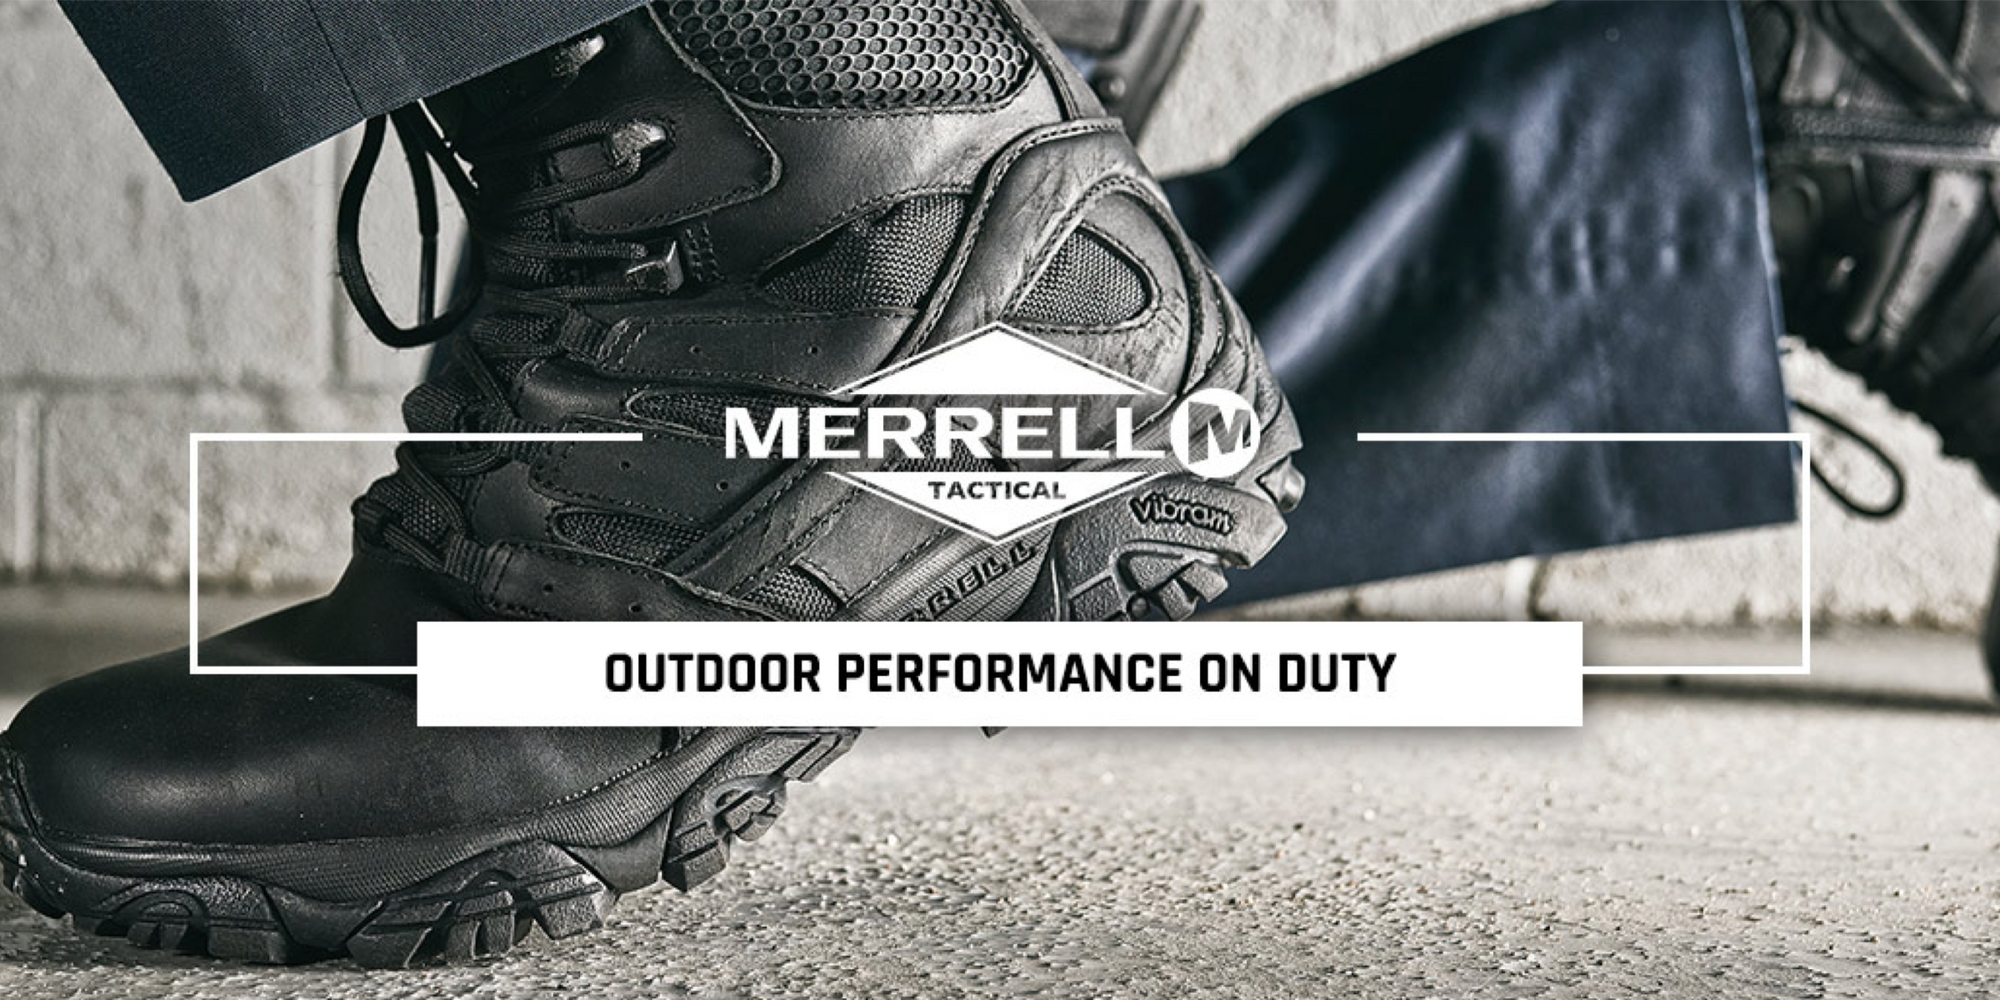 The Briefing Room - Tactical Gear Blog Merrell Tactical Boots available from Tactical Gear Australia Tactical Gear Australia